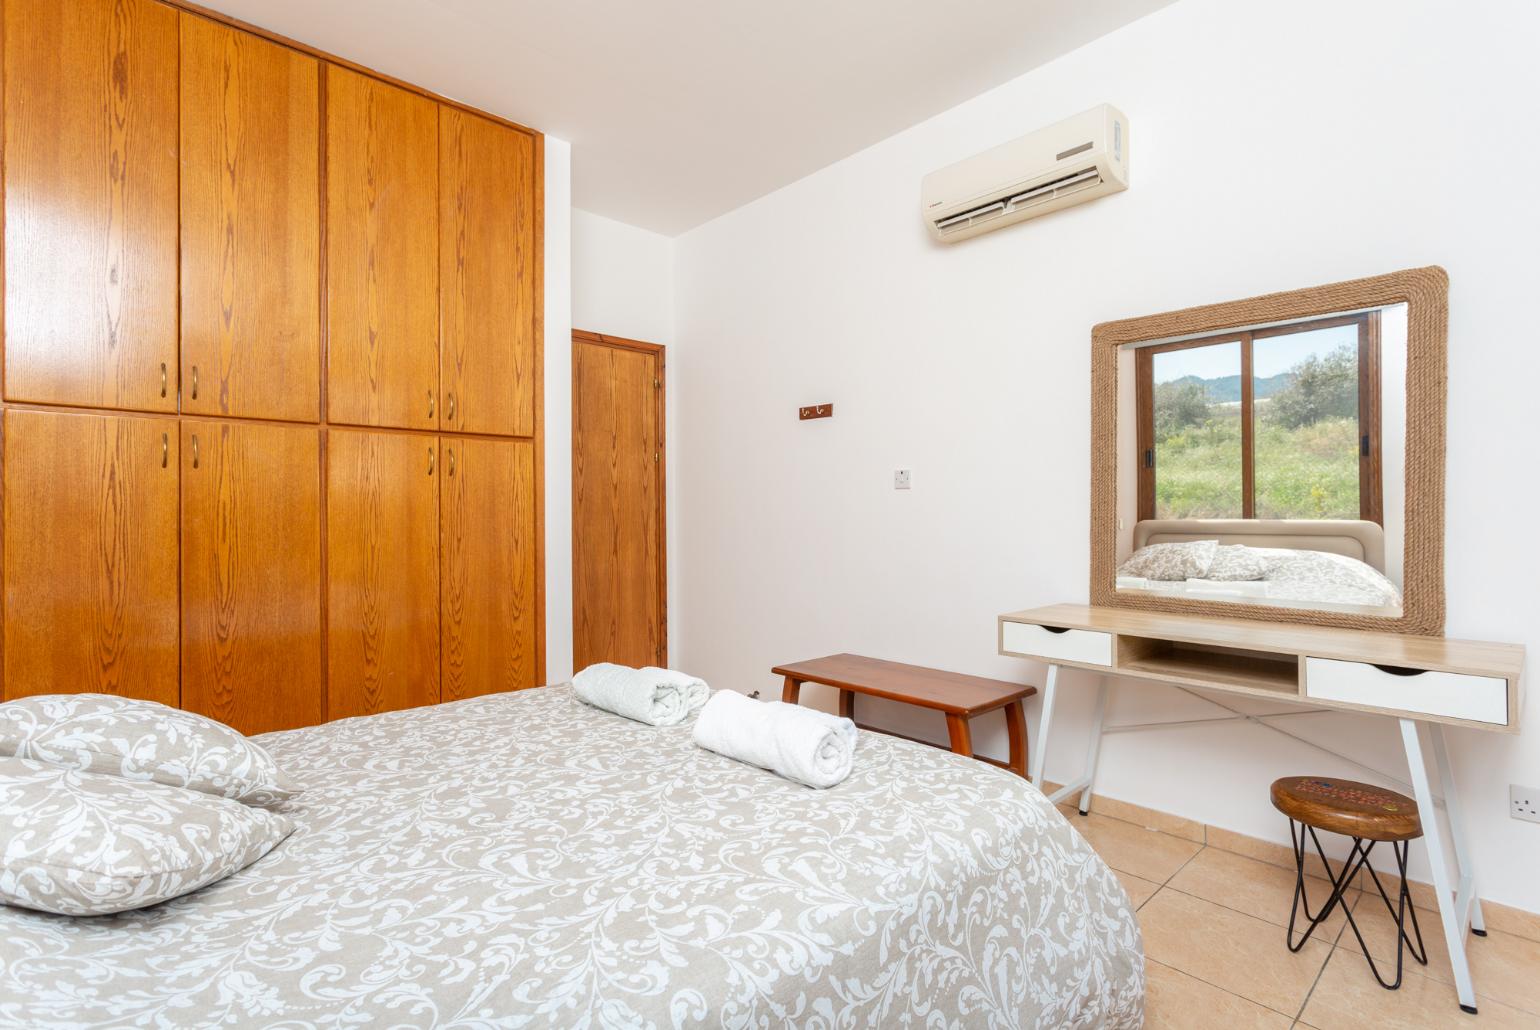 Double bedroom with A/C and terrace access